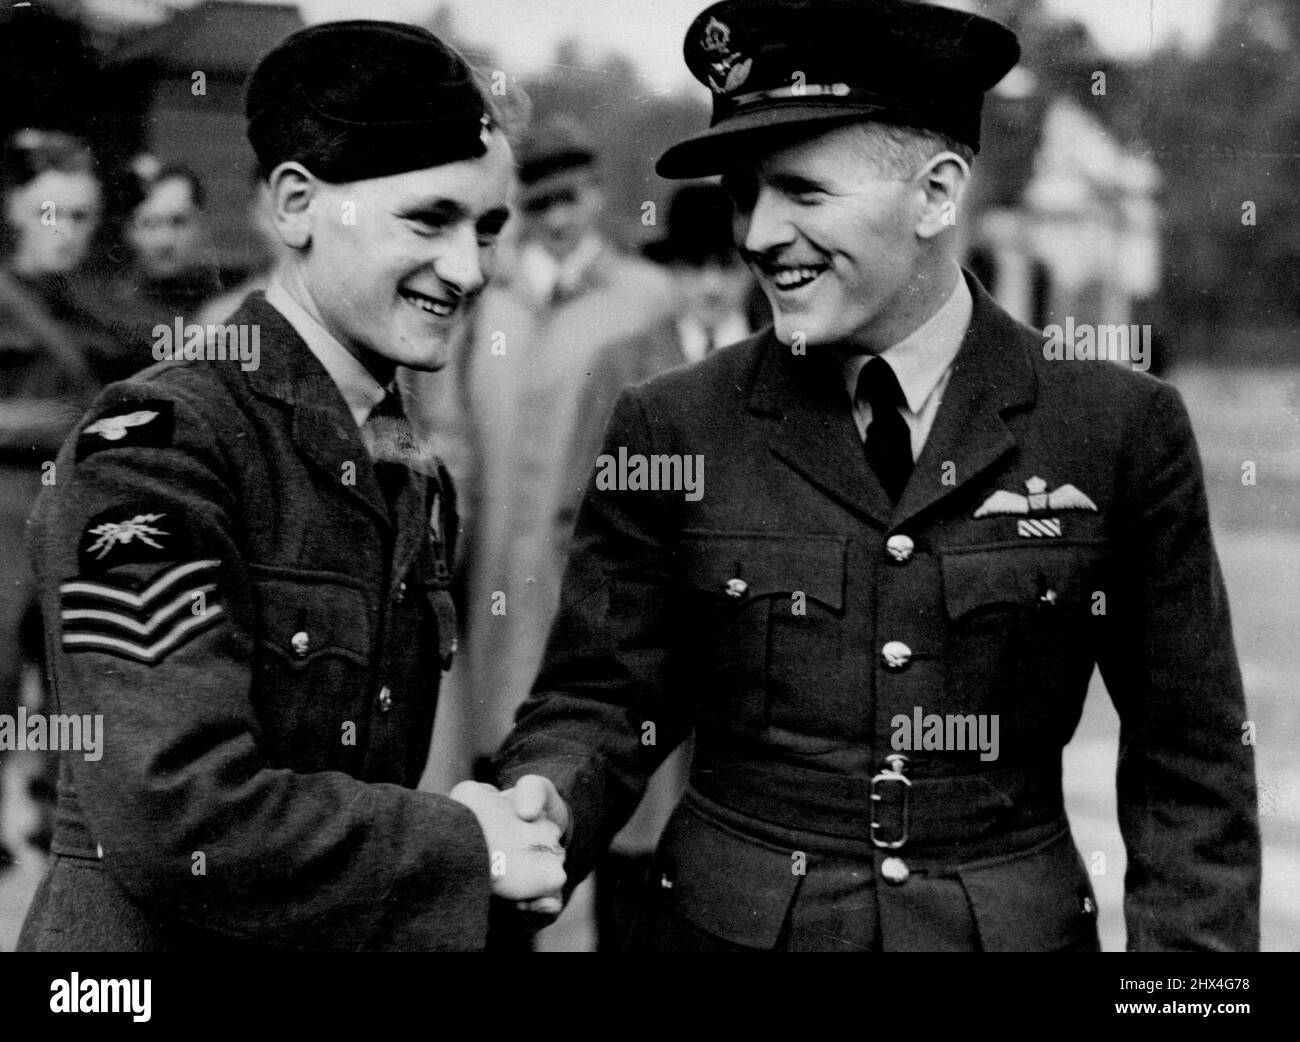 Sergeant Hannah V.C. being congratulated by his pilot, pilot officer C.A. Conner, who was decorated with the D.F.C. outside the palace to-day. ***** Britain's youngest V.C.awarded his decoration for putting out a fire in a blazing aircraft was decorated by the King at Buckingham Palace to-day. Just out of hospital, recovering from extensive burns, Hannah had arrived home expecting three weeks leave. Instead he was recalled to London, and arrived here from Glasgow early this morning. October 10, 1940. Stock Photo